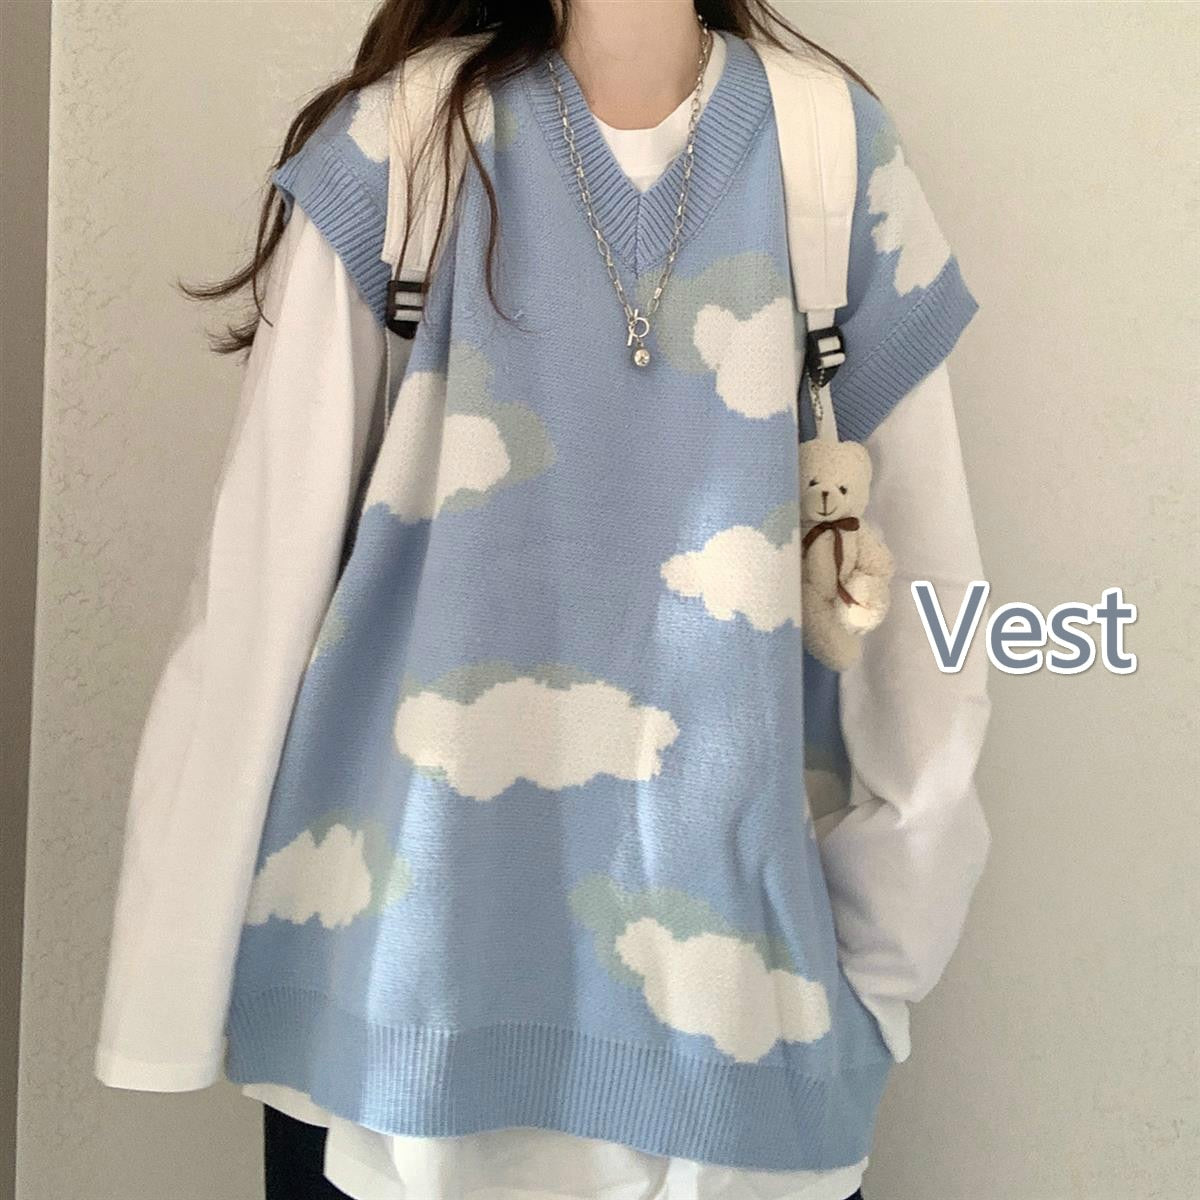 Prettyswomen Sweaters Women Harajuku Lovely Chic Preppy Simple Soft Loose Autumn Spring Teens Knitwear Casual Fashion Korean Girls Pullover